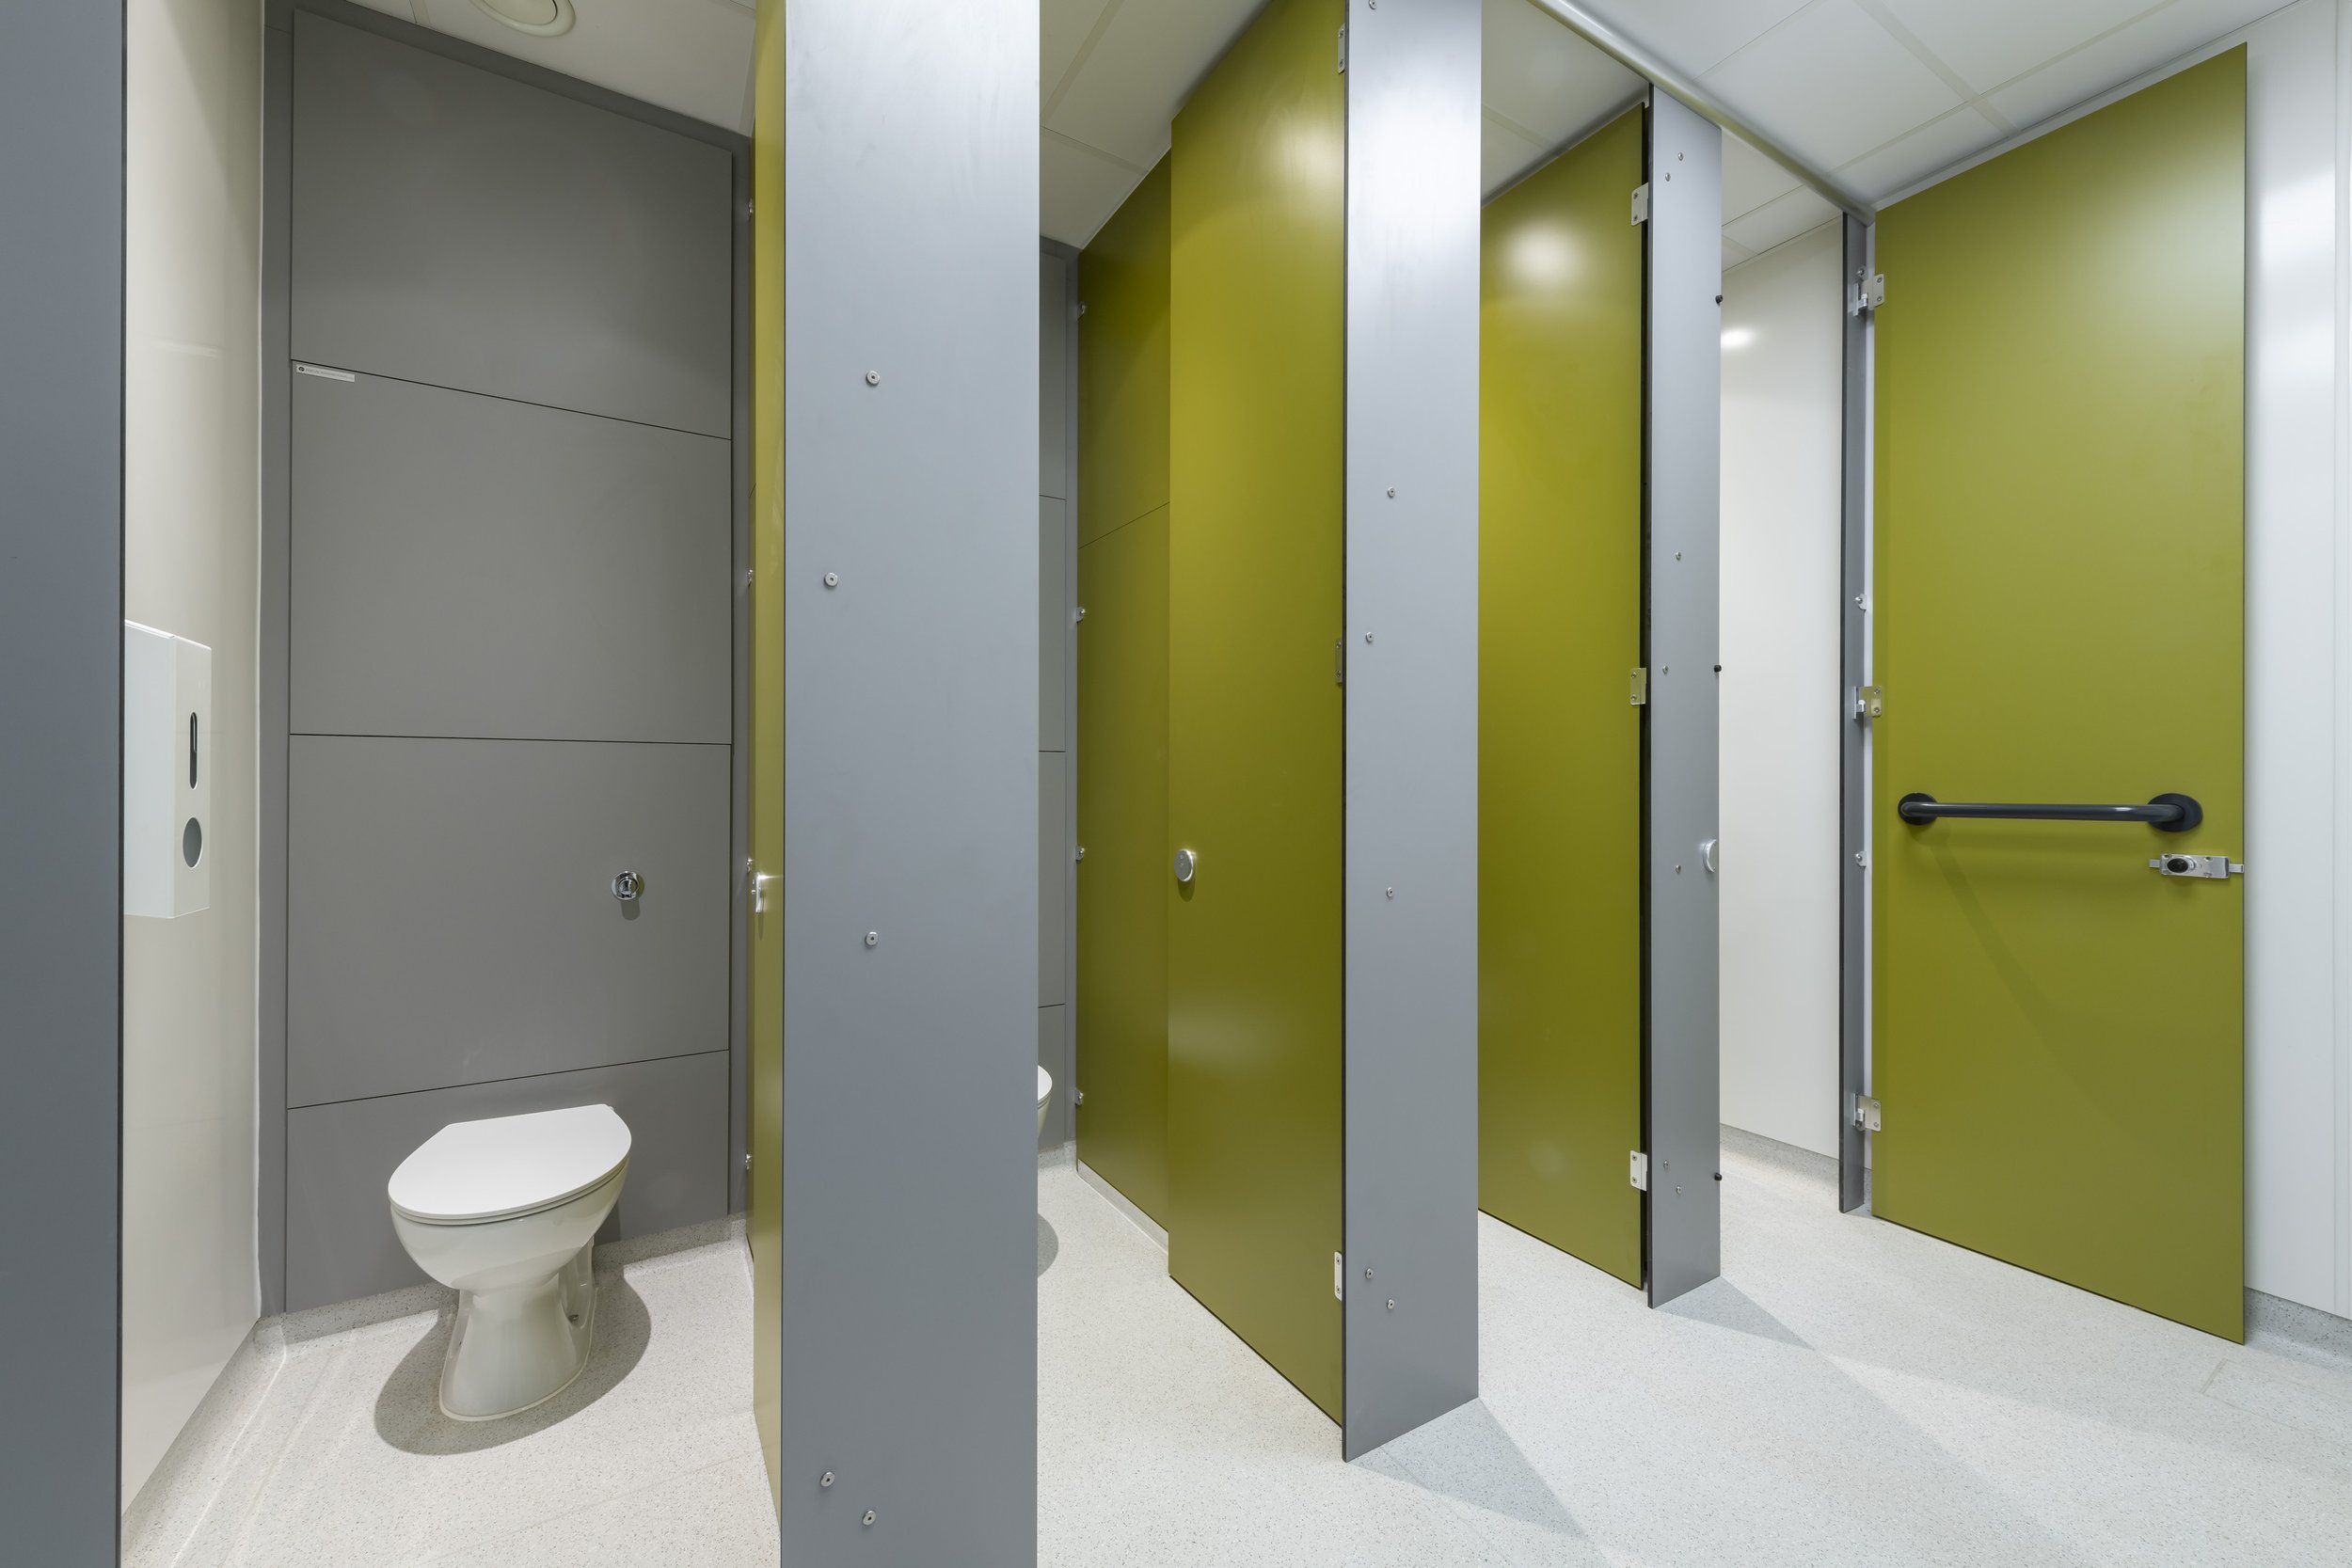 green privacy toilet cubicles at stoke high.jpg